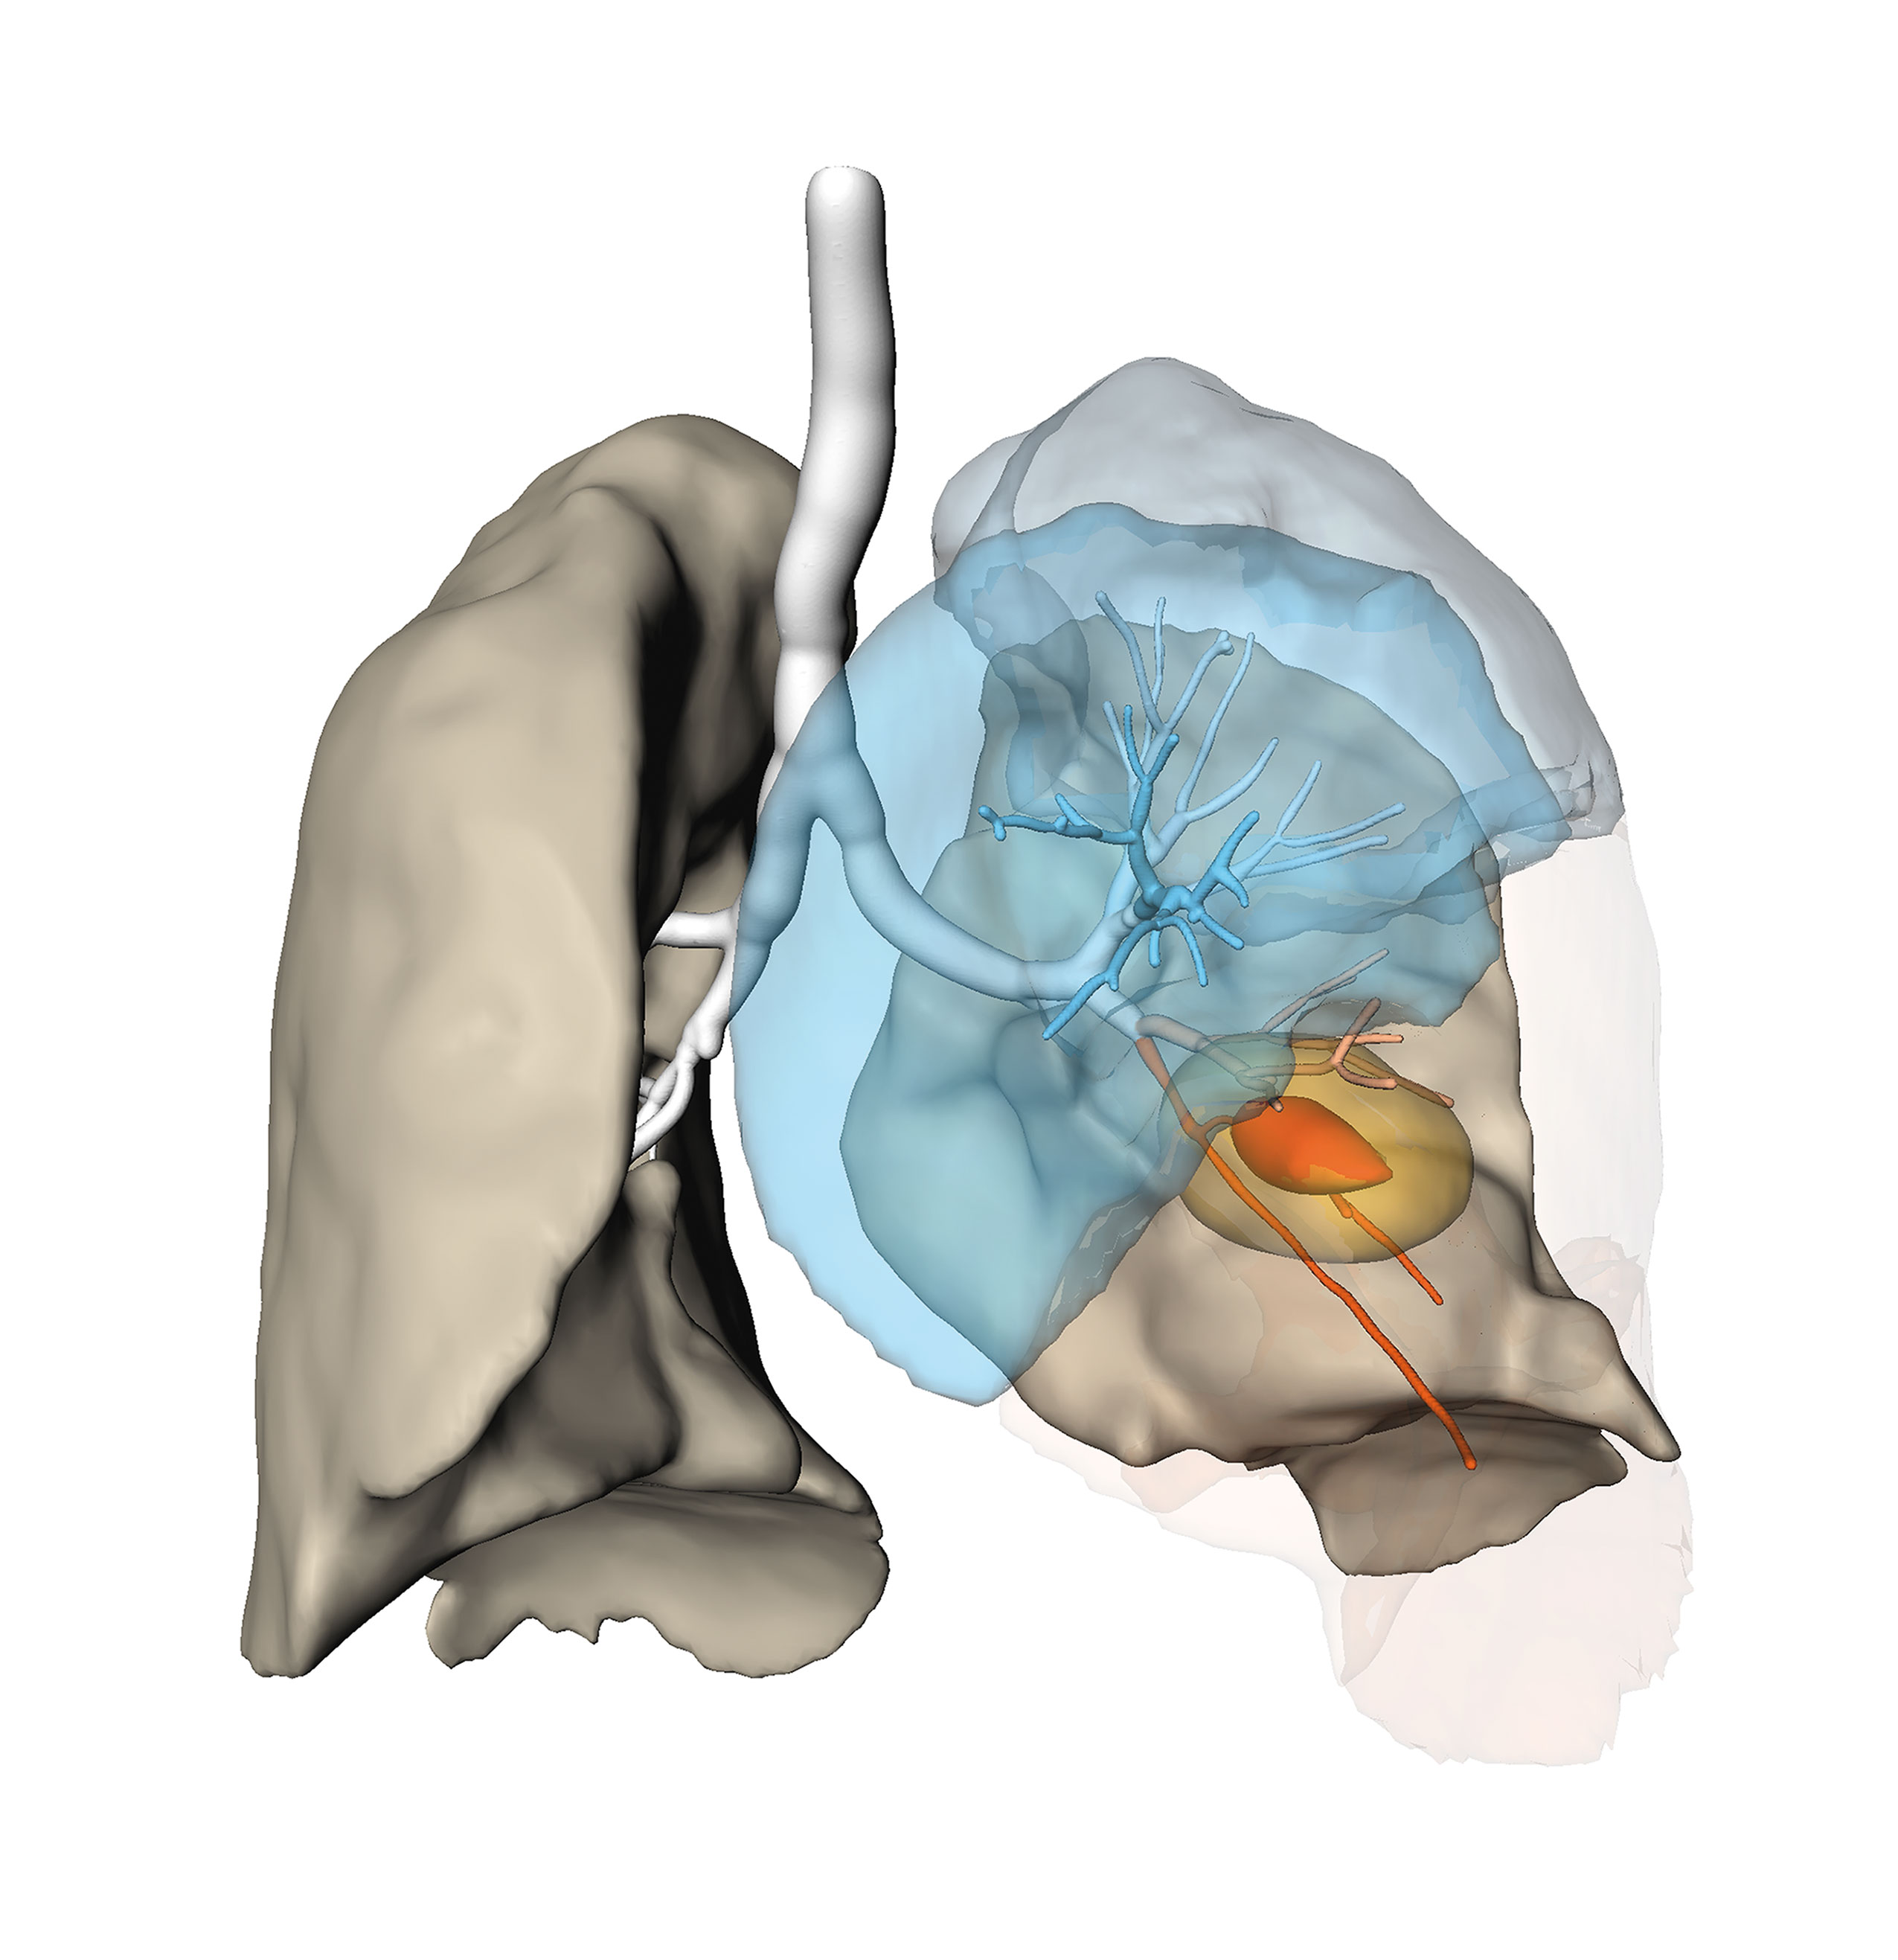 Risk analysis for planning a lung resection